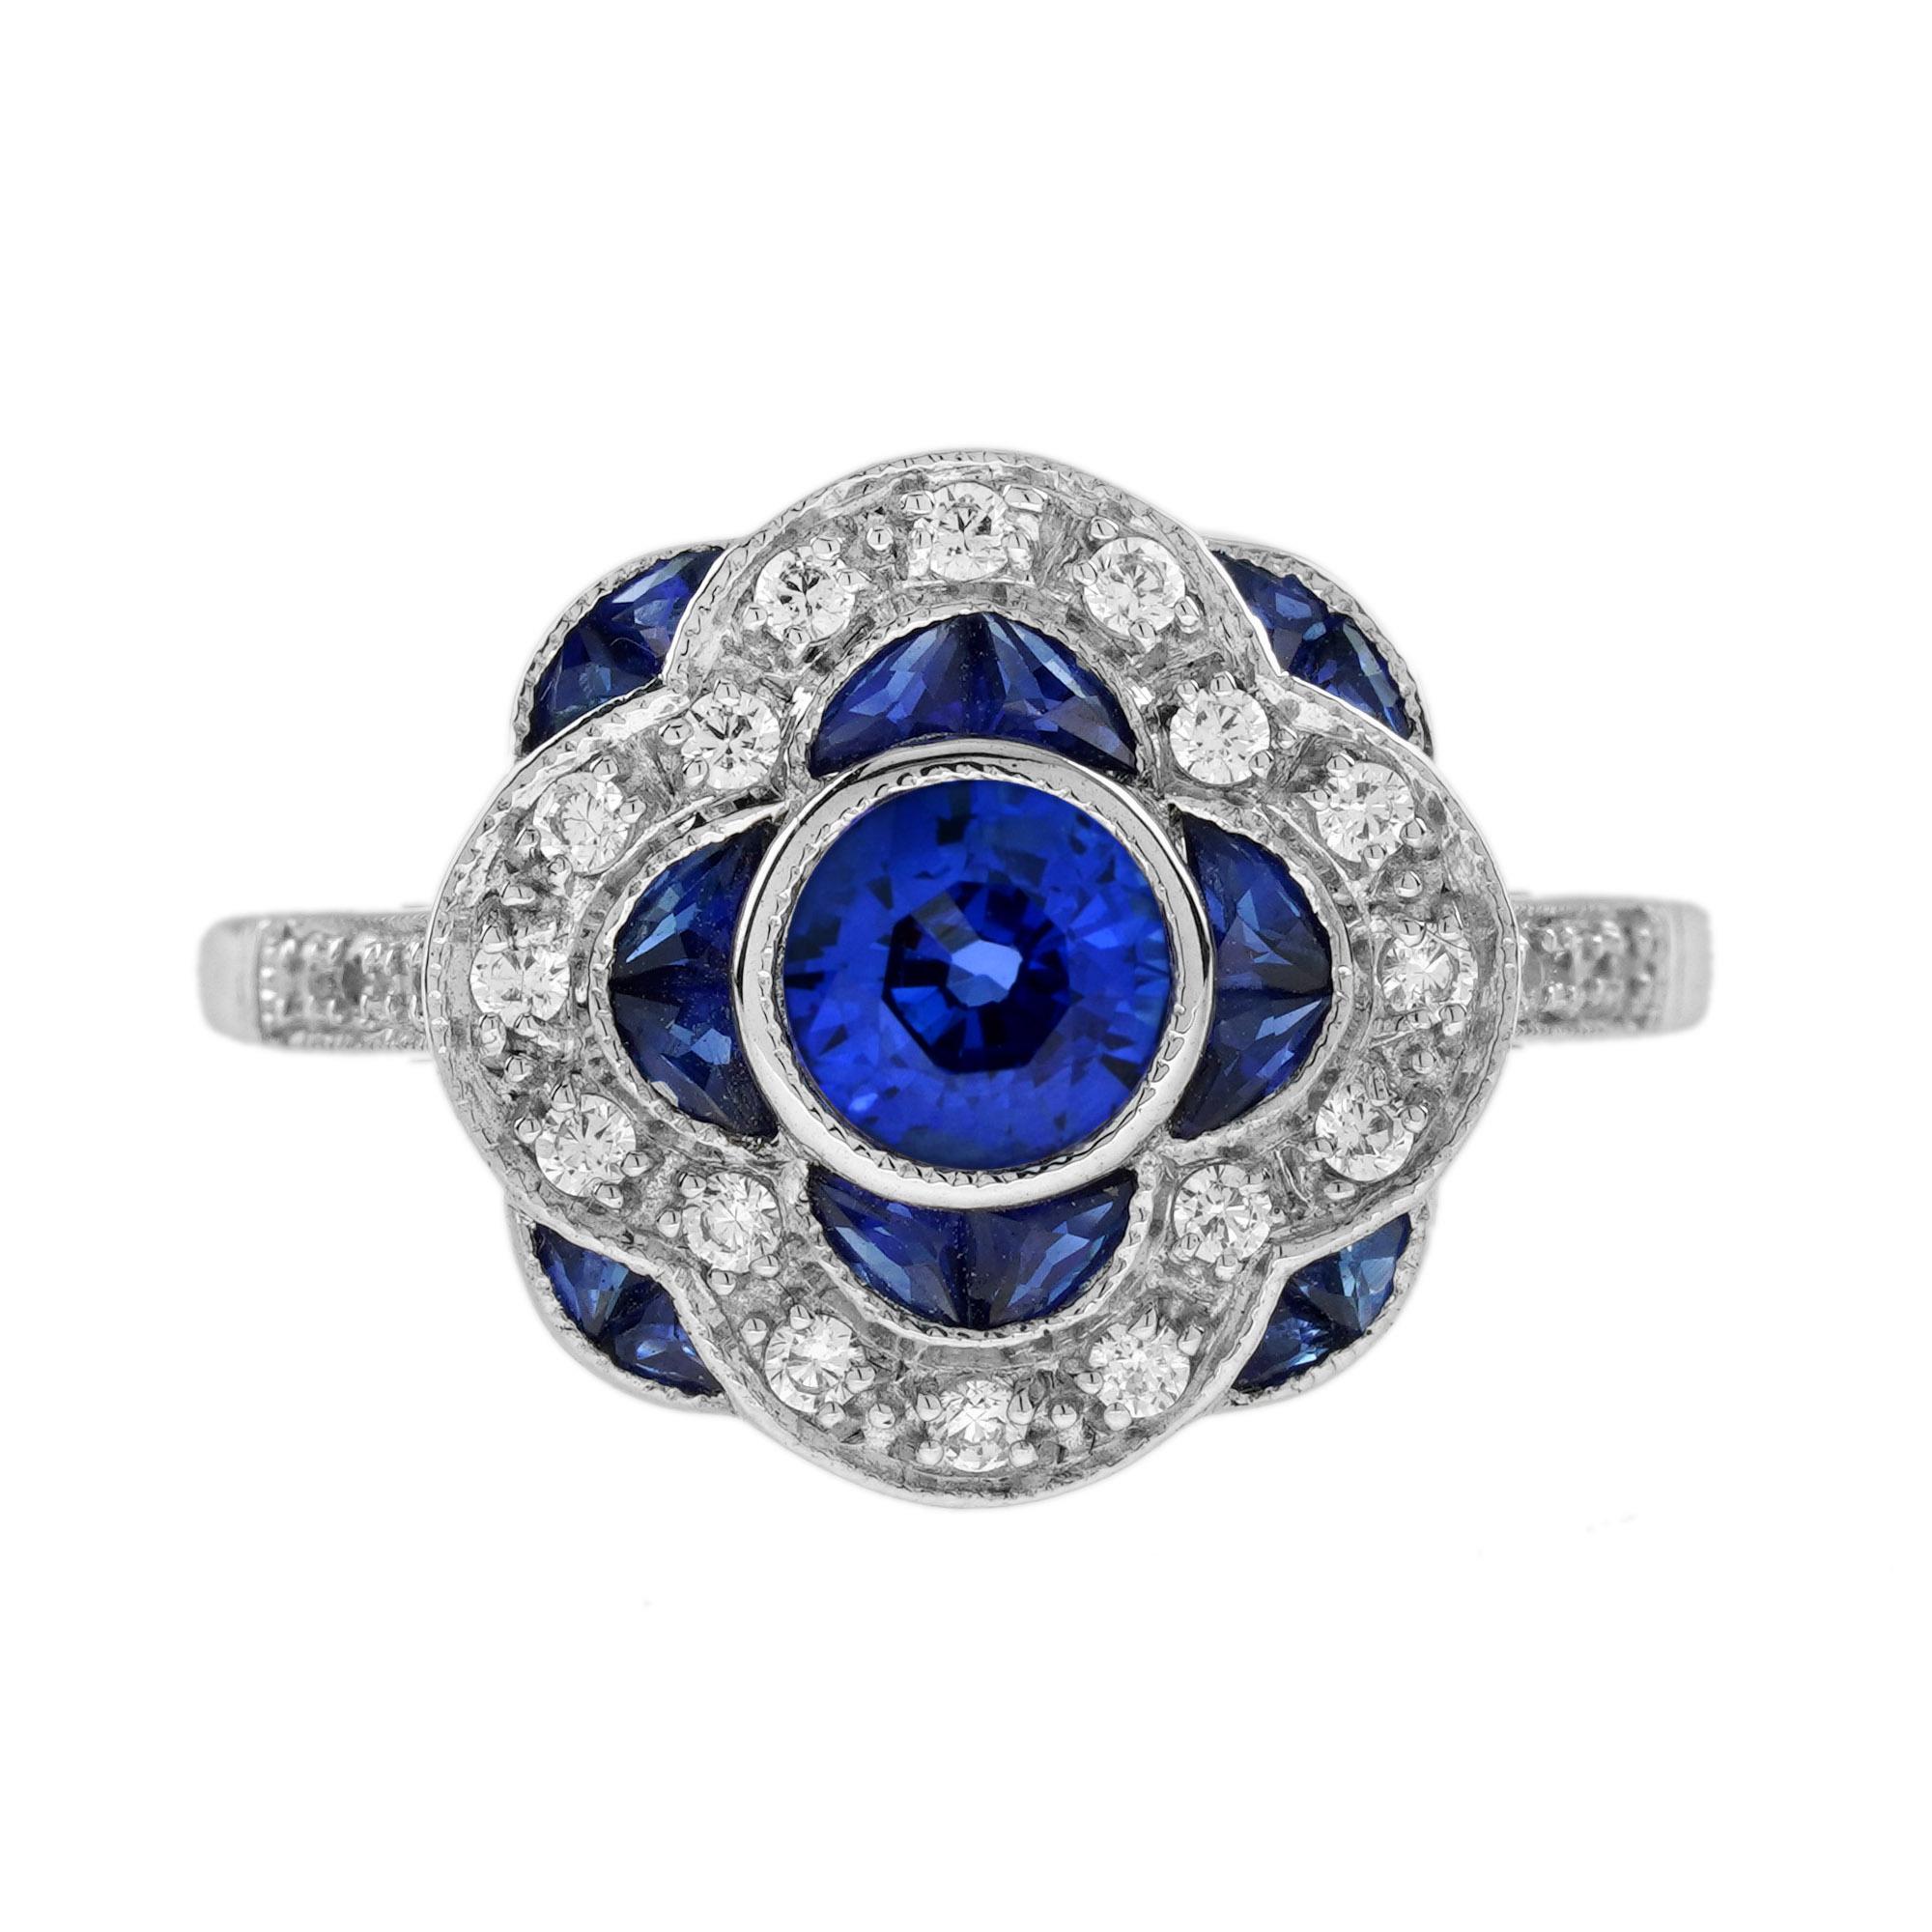 For Sale:  Ceylon Sapphire and Diamond Art Deco Style Floral Halo Ring in 18K White Gold